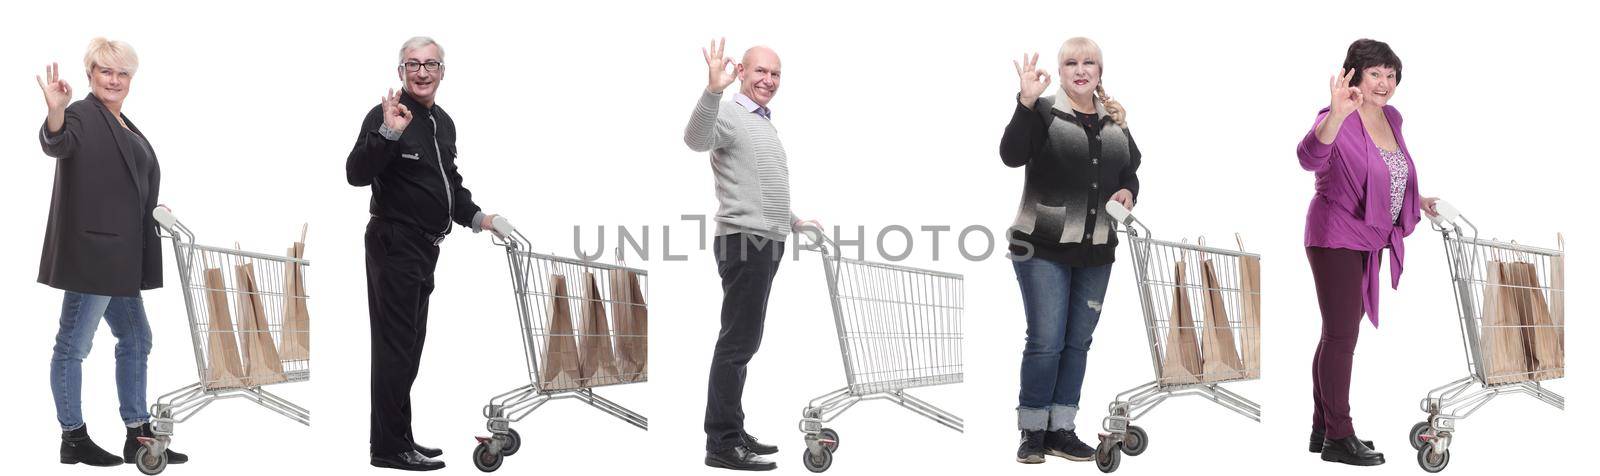 group of people in profile with shopping cart isolated by asdf